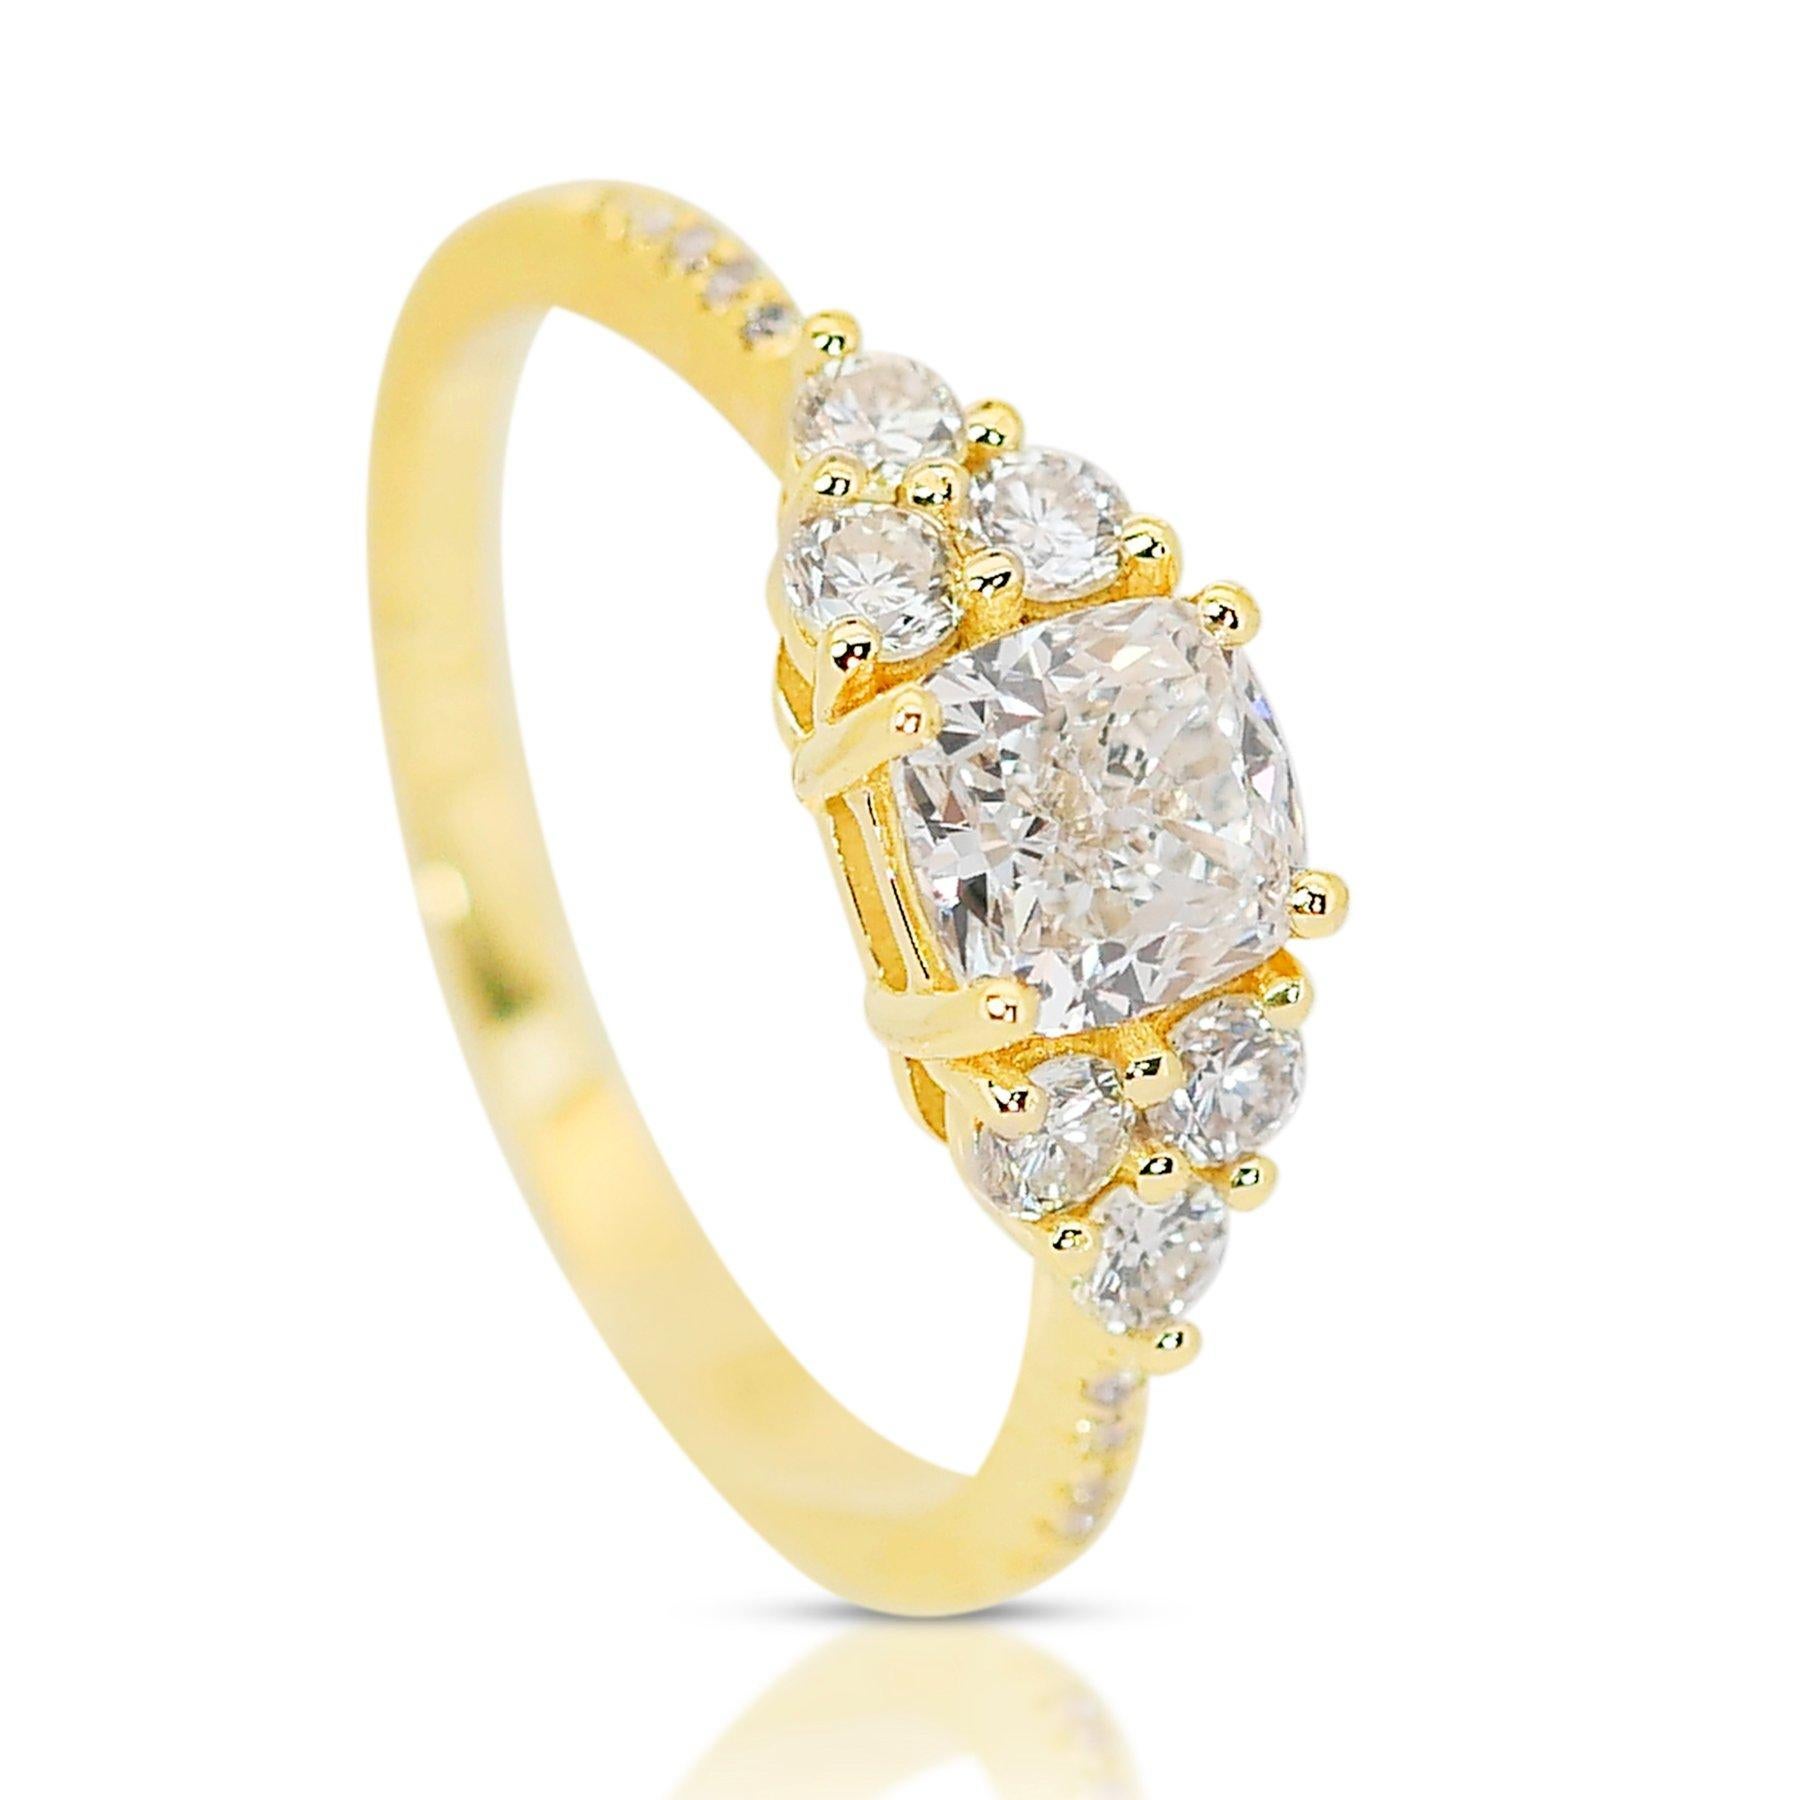 Lustrous 1.32ct Diamond Pave Ring in 18k Yellow Gold - GIA Certified

Crafted in 18k yellow gold, this exquisite diamond pave ring showcases a captivating 1.00-carat cushion-cut diamond, ensuring a flawless appearance with outstanding sparkle. The